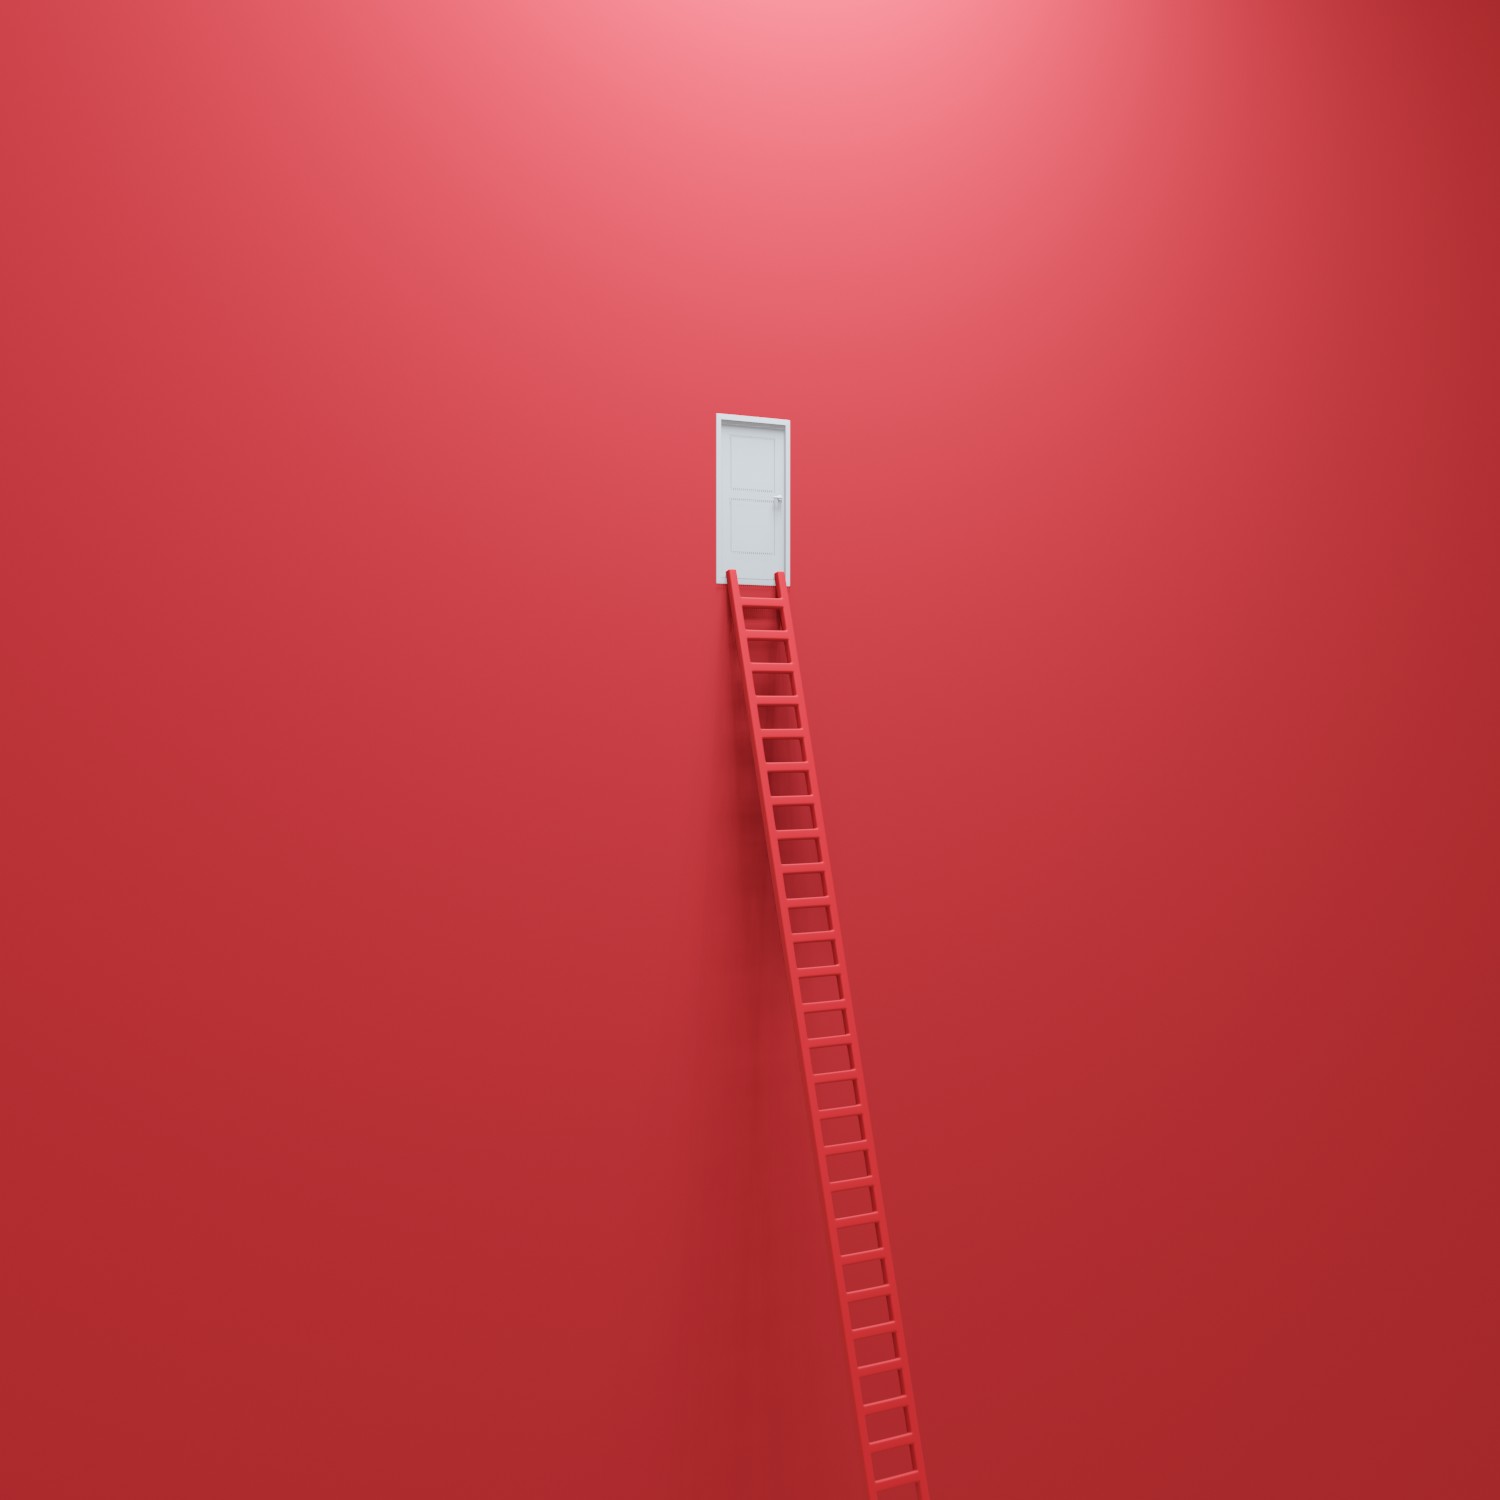 Digital Rendering of a white door on a red wall with ladder leading to it